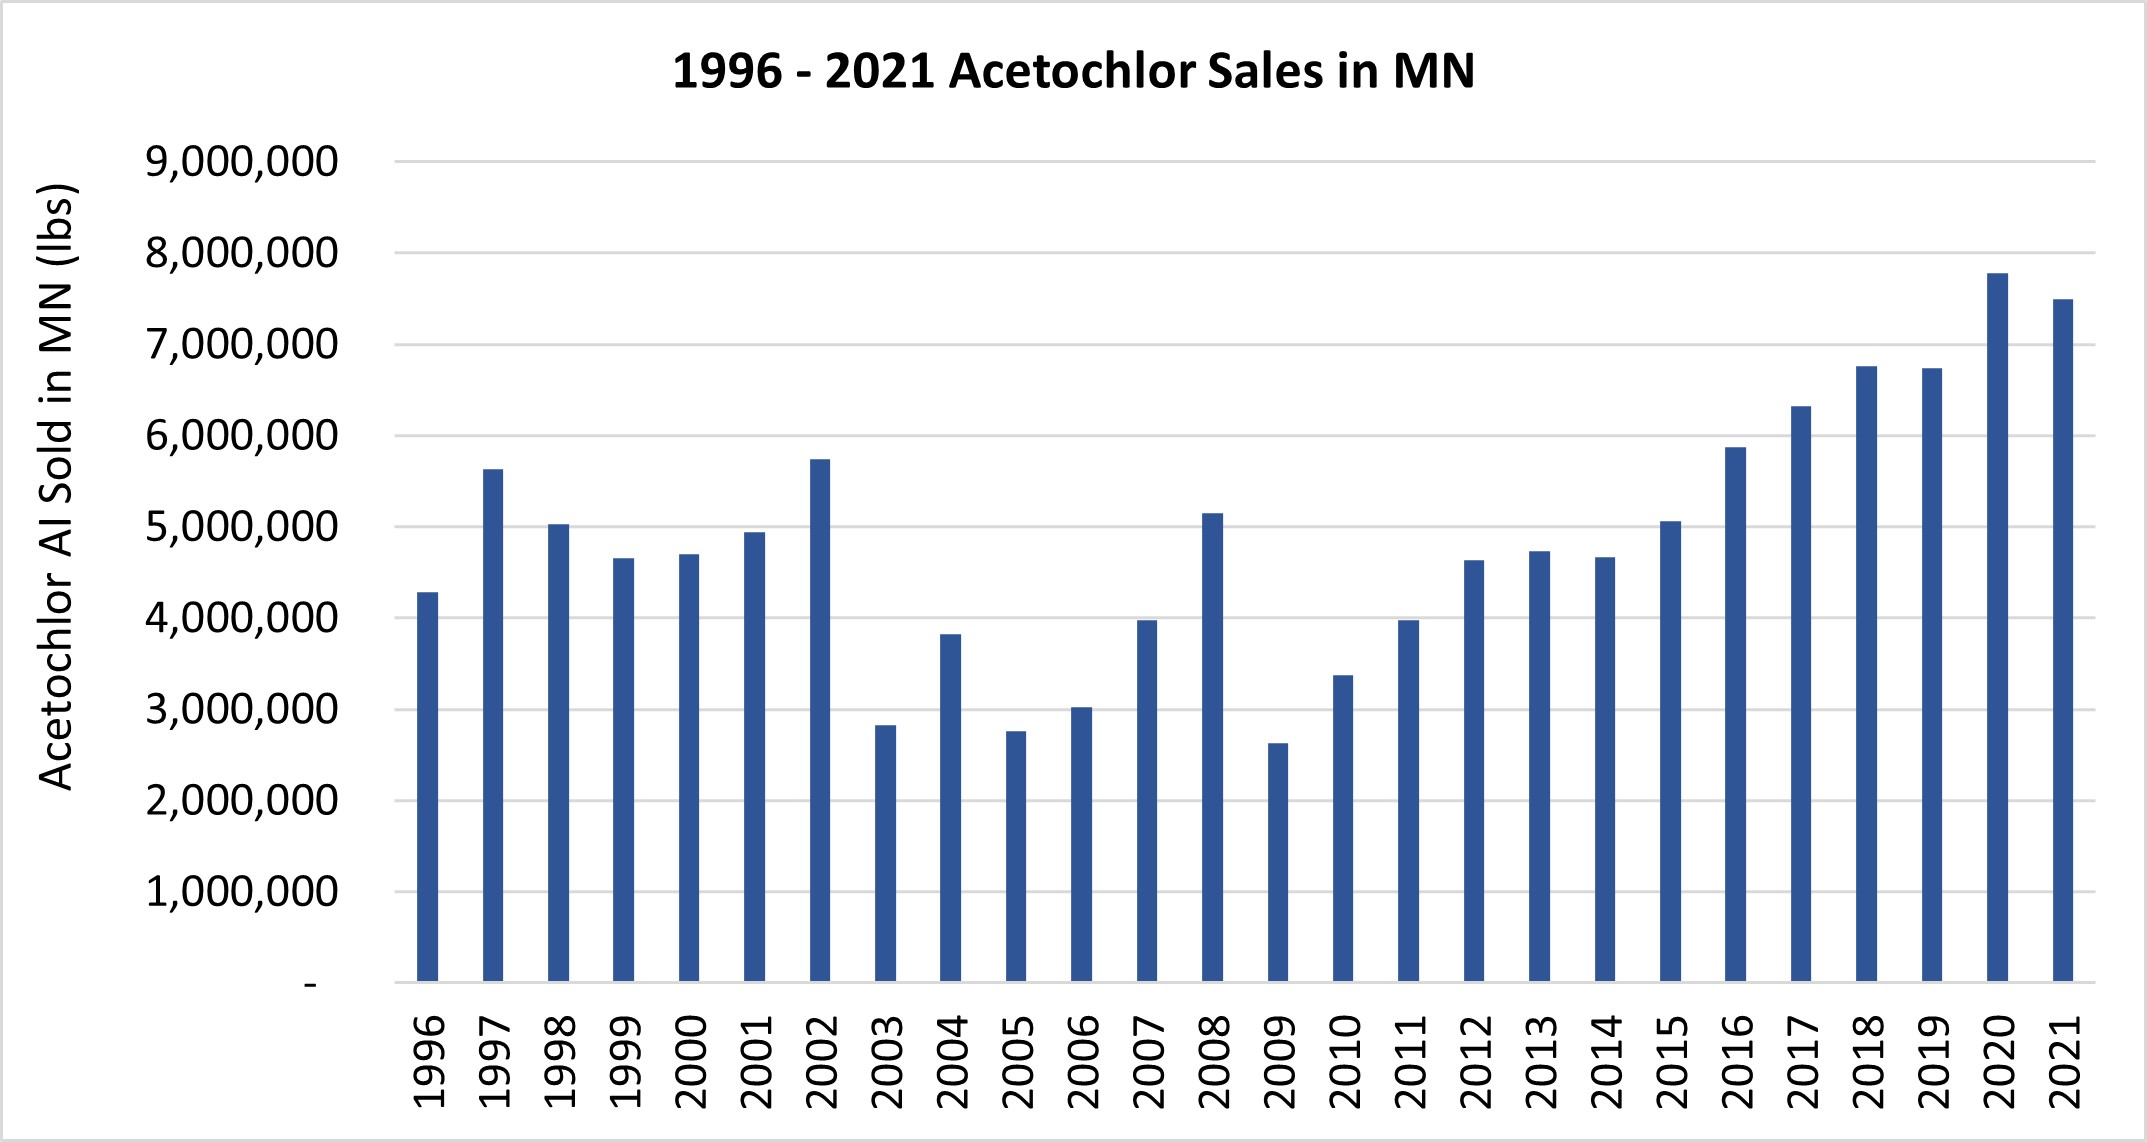 Total reported pounds of acetochlor active ingredients (a.i.) sold in Minnesota from 1996-2021. In 2021, over 7 million pounds were sold in Minnesota. In 2009 sales were just above 2.5 million pounds. Sales steadily increased between 2009 and 2020, slight decrease in 2021.